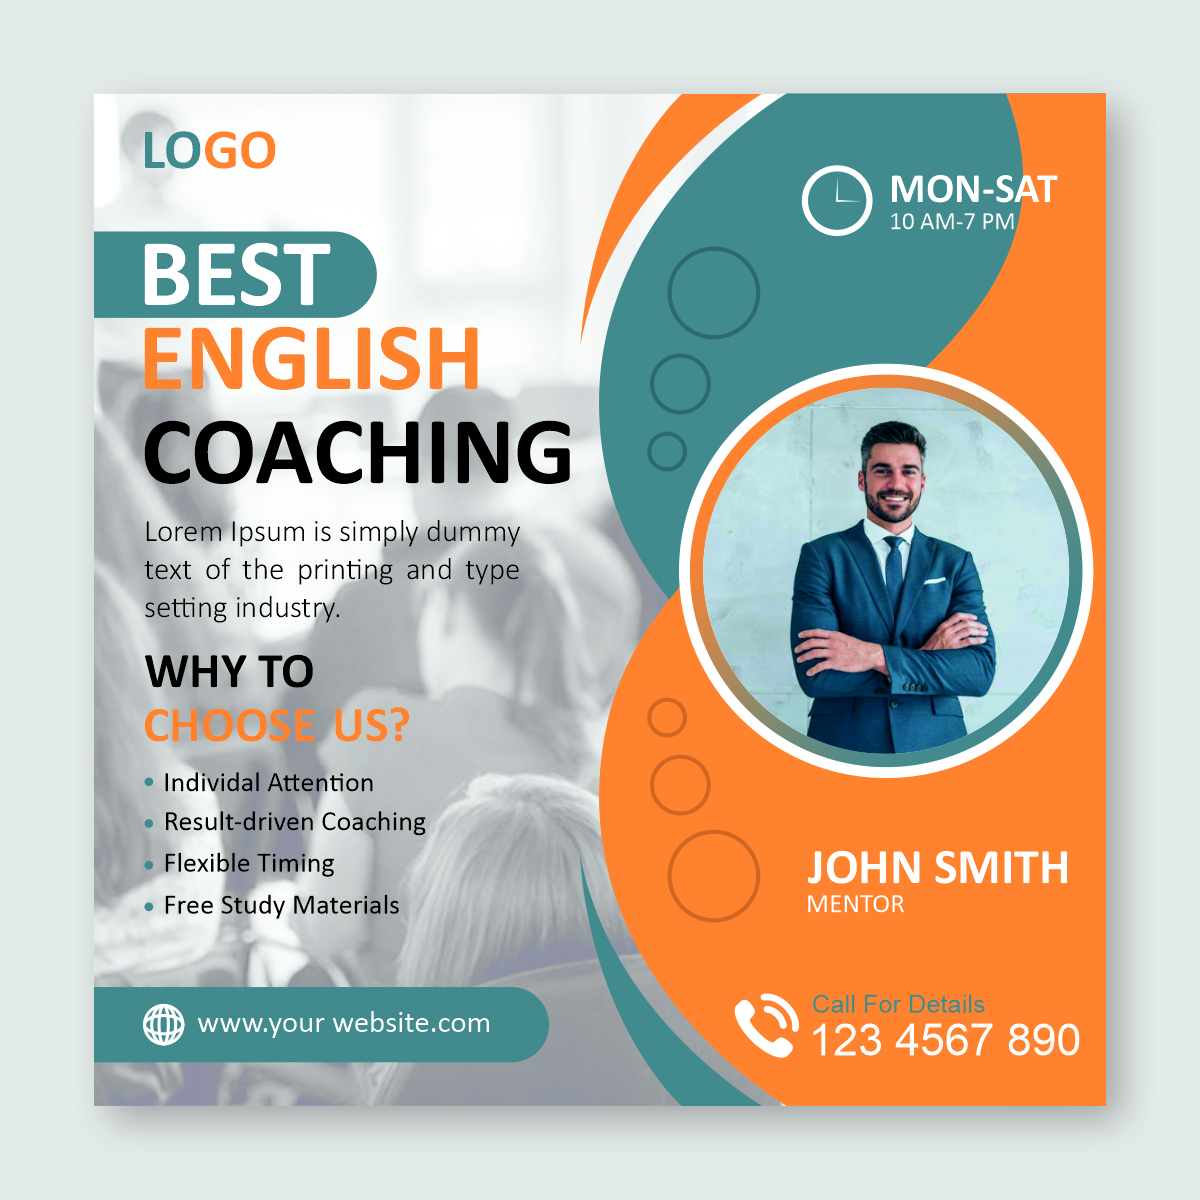 best english coaching poster vector design download for free